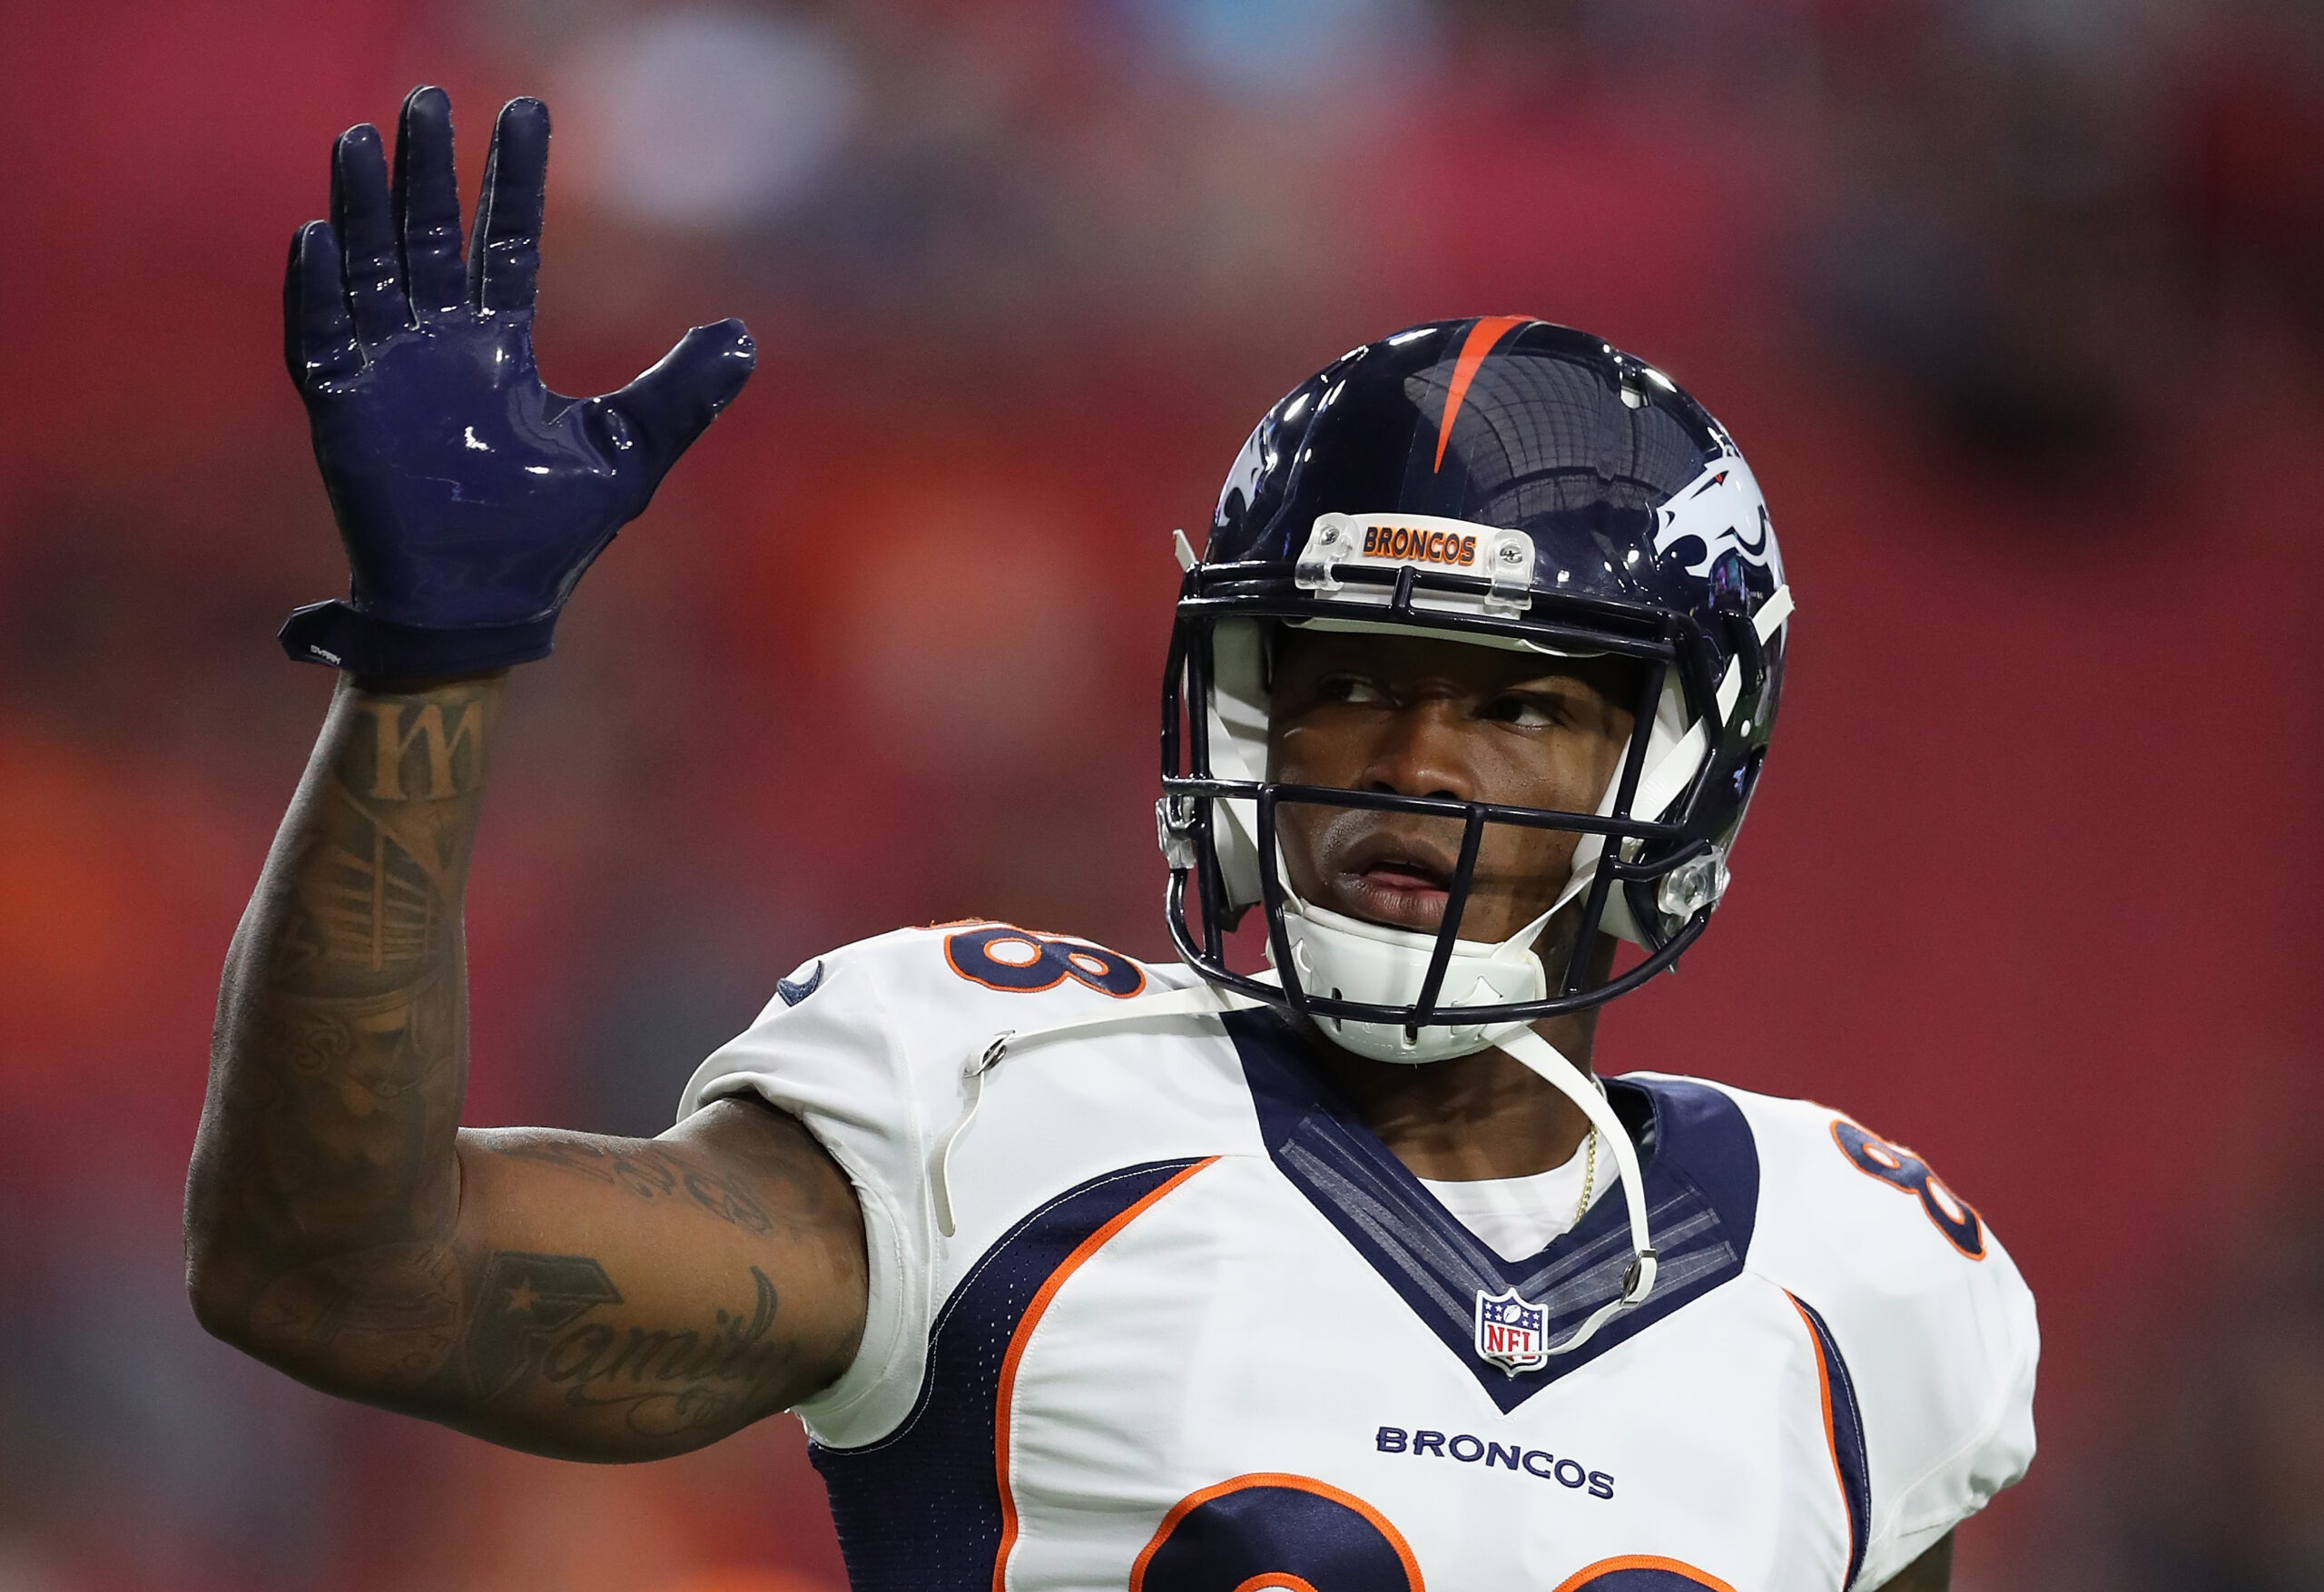 Former Broncos Star Wideout Demaryius Thomas Dies at 33: ‘We Are Devastated’